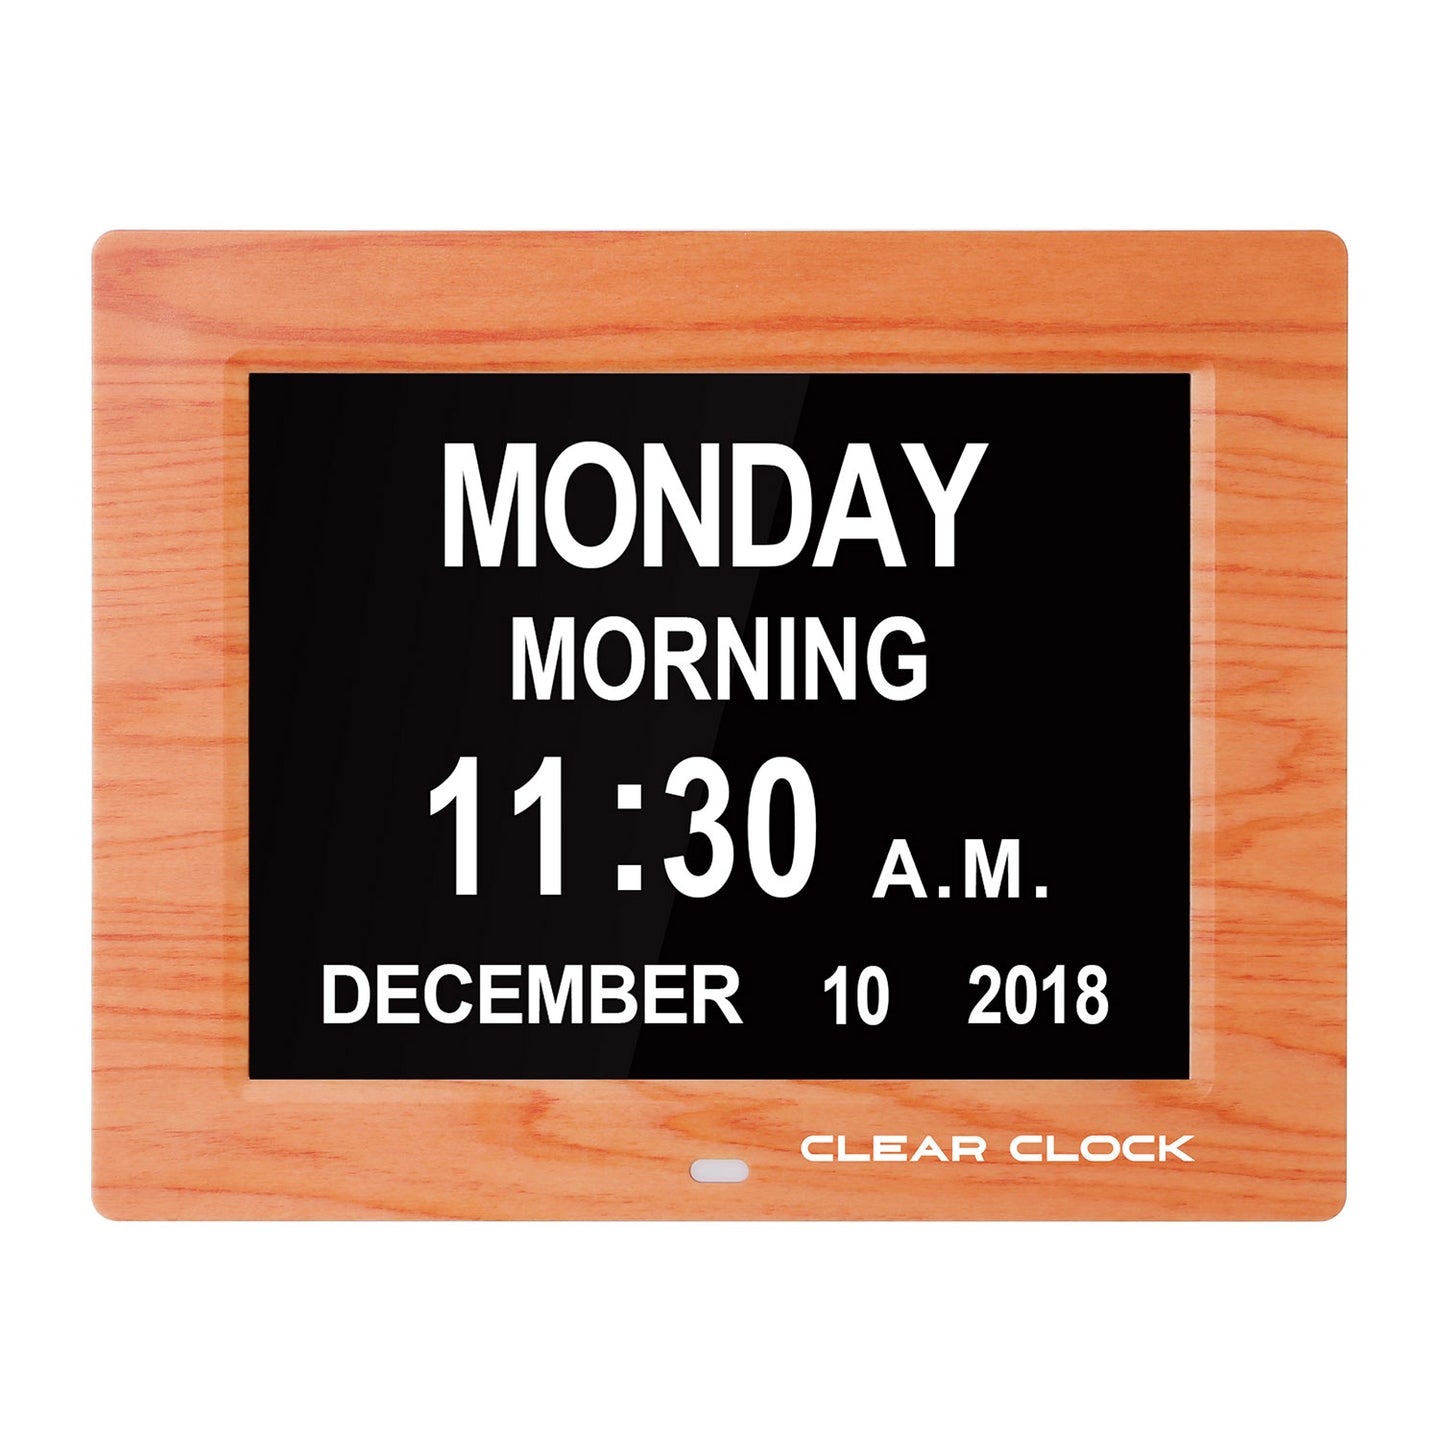 Clear Clock Digital Memory Loss Calendar Day Clock With Optional Day Cycle Mode (OAK)